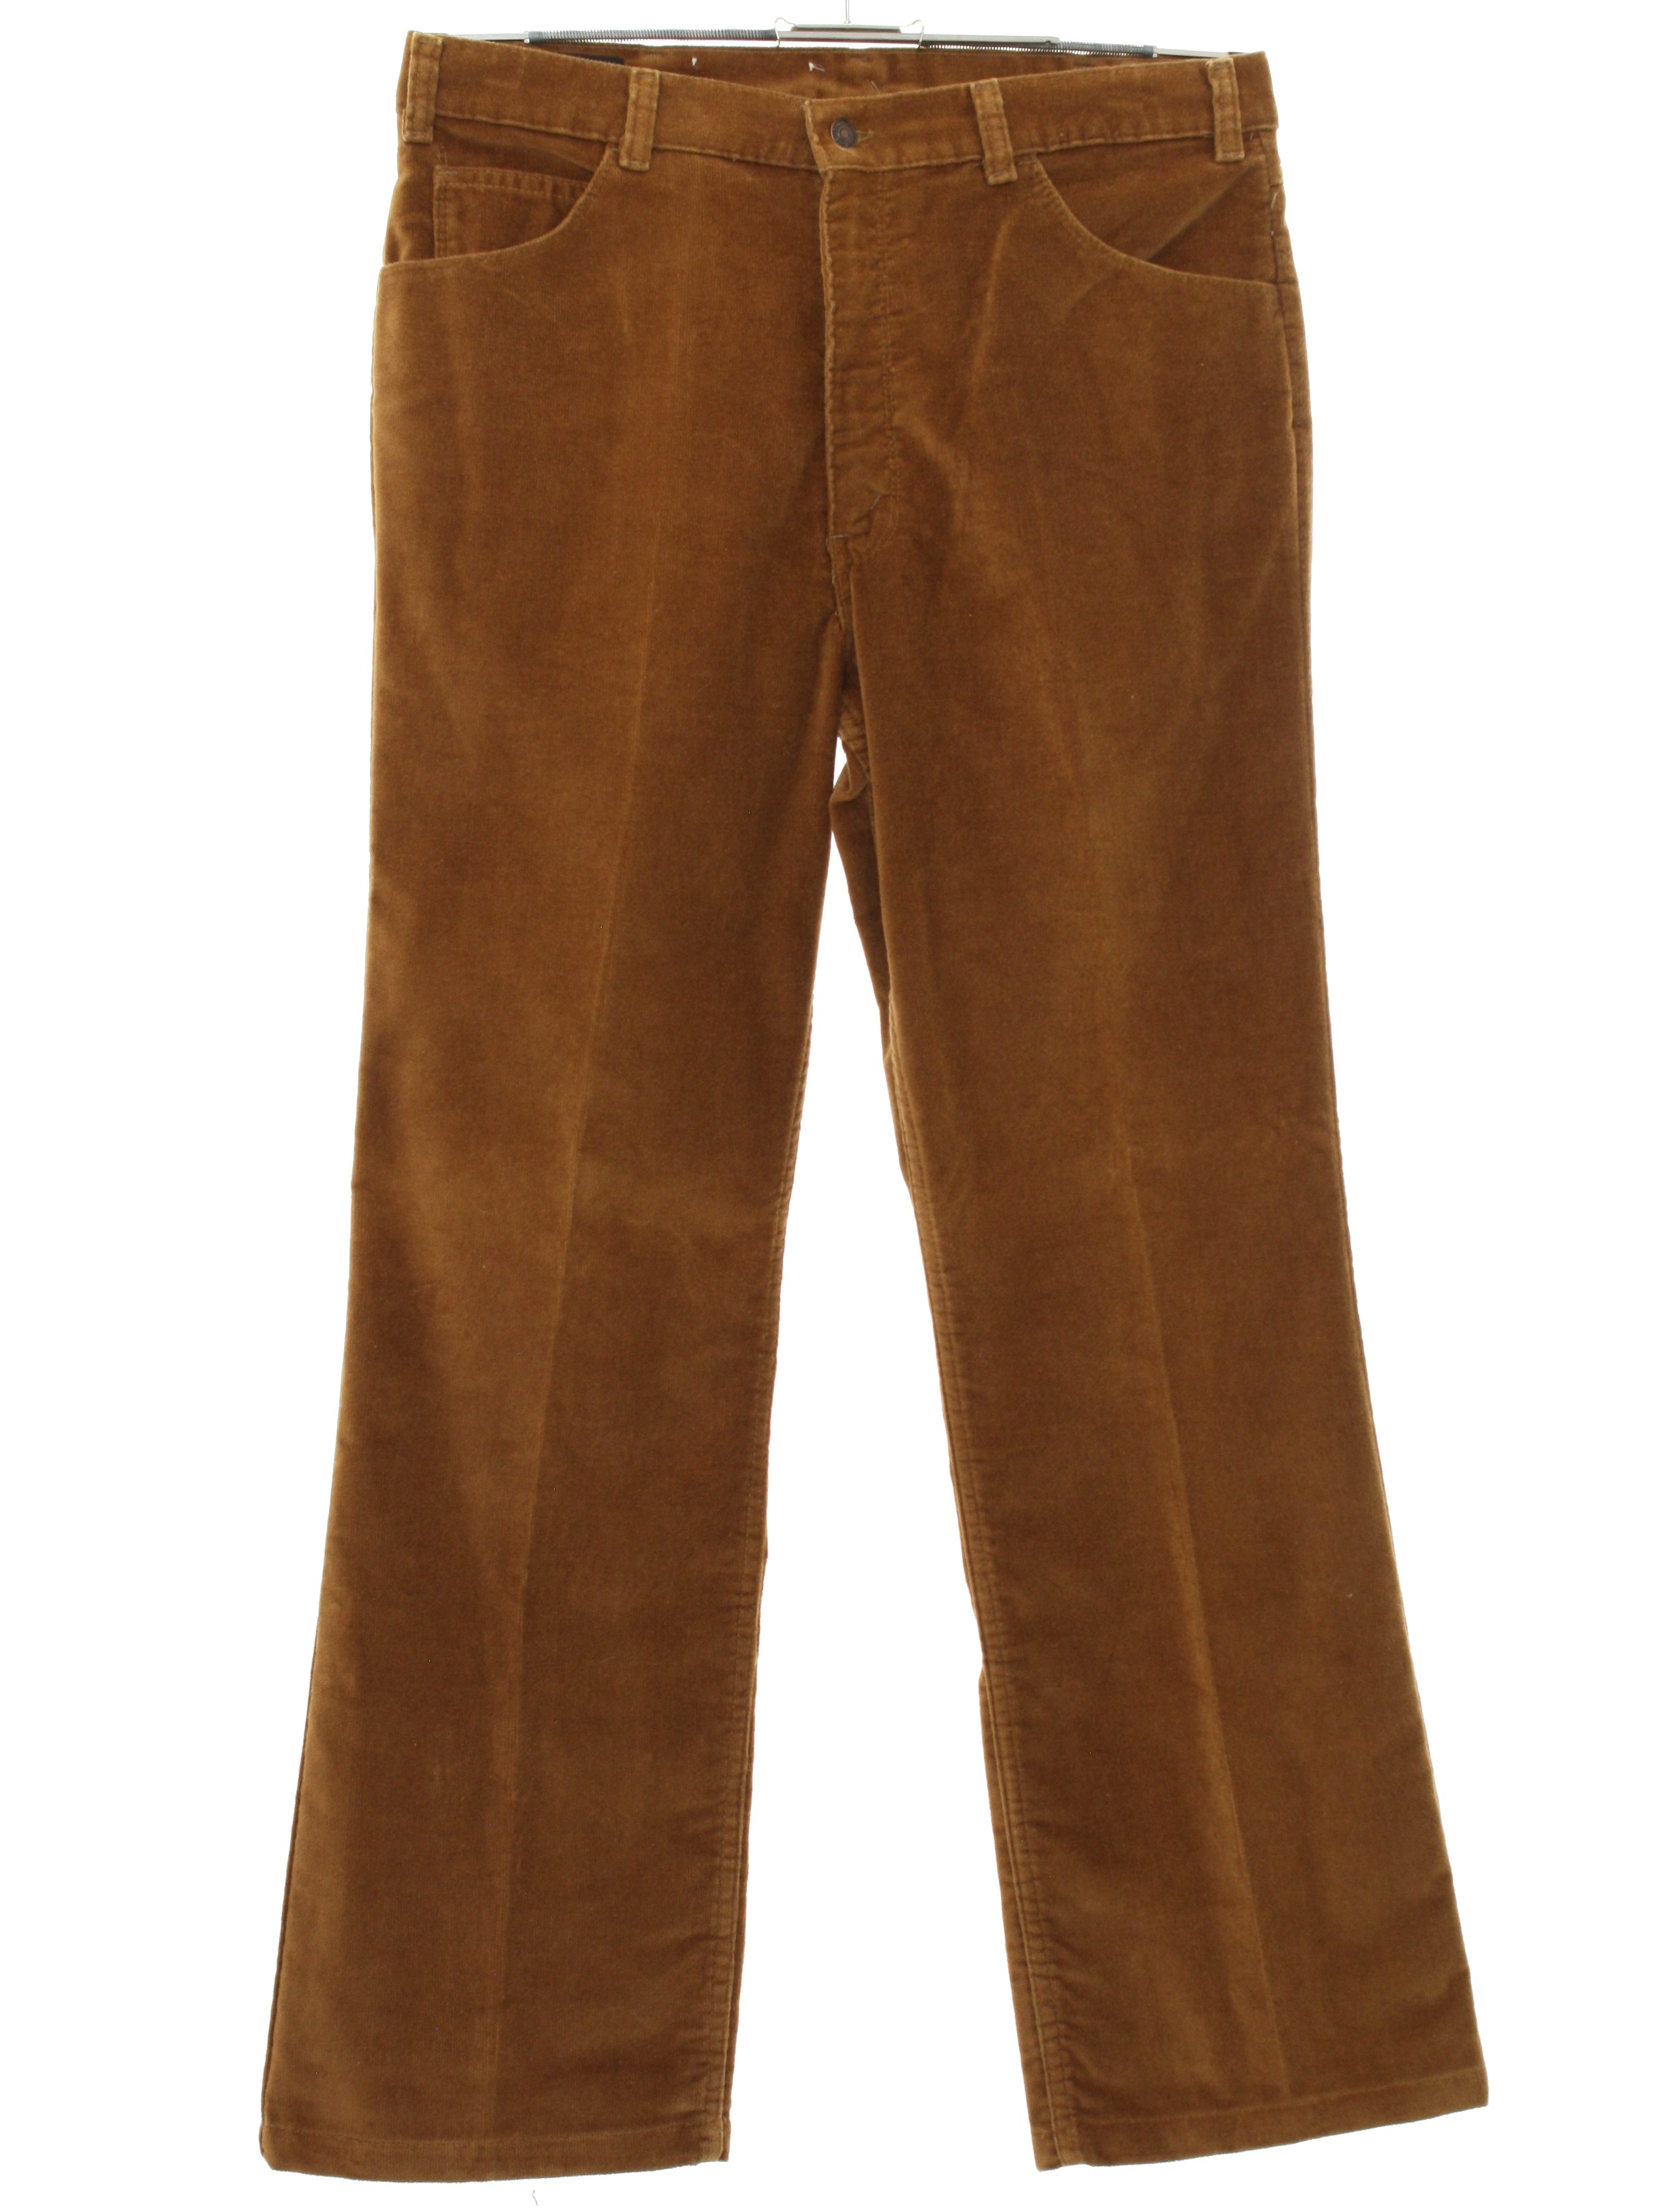 70's Levis Movin On Flared Pants / Flares: 70s -Levis Movin On- Mens golden  brown brushed cotton corduroy jeans cut pants with flat front, zipper fly,  flared legs, plain cuffless hems, inset